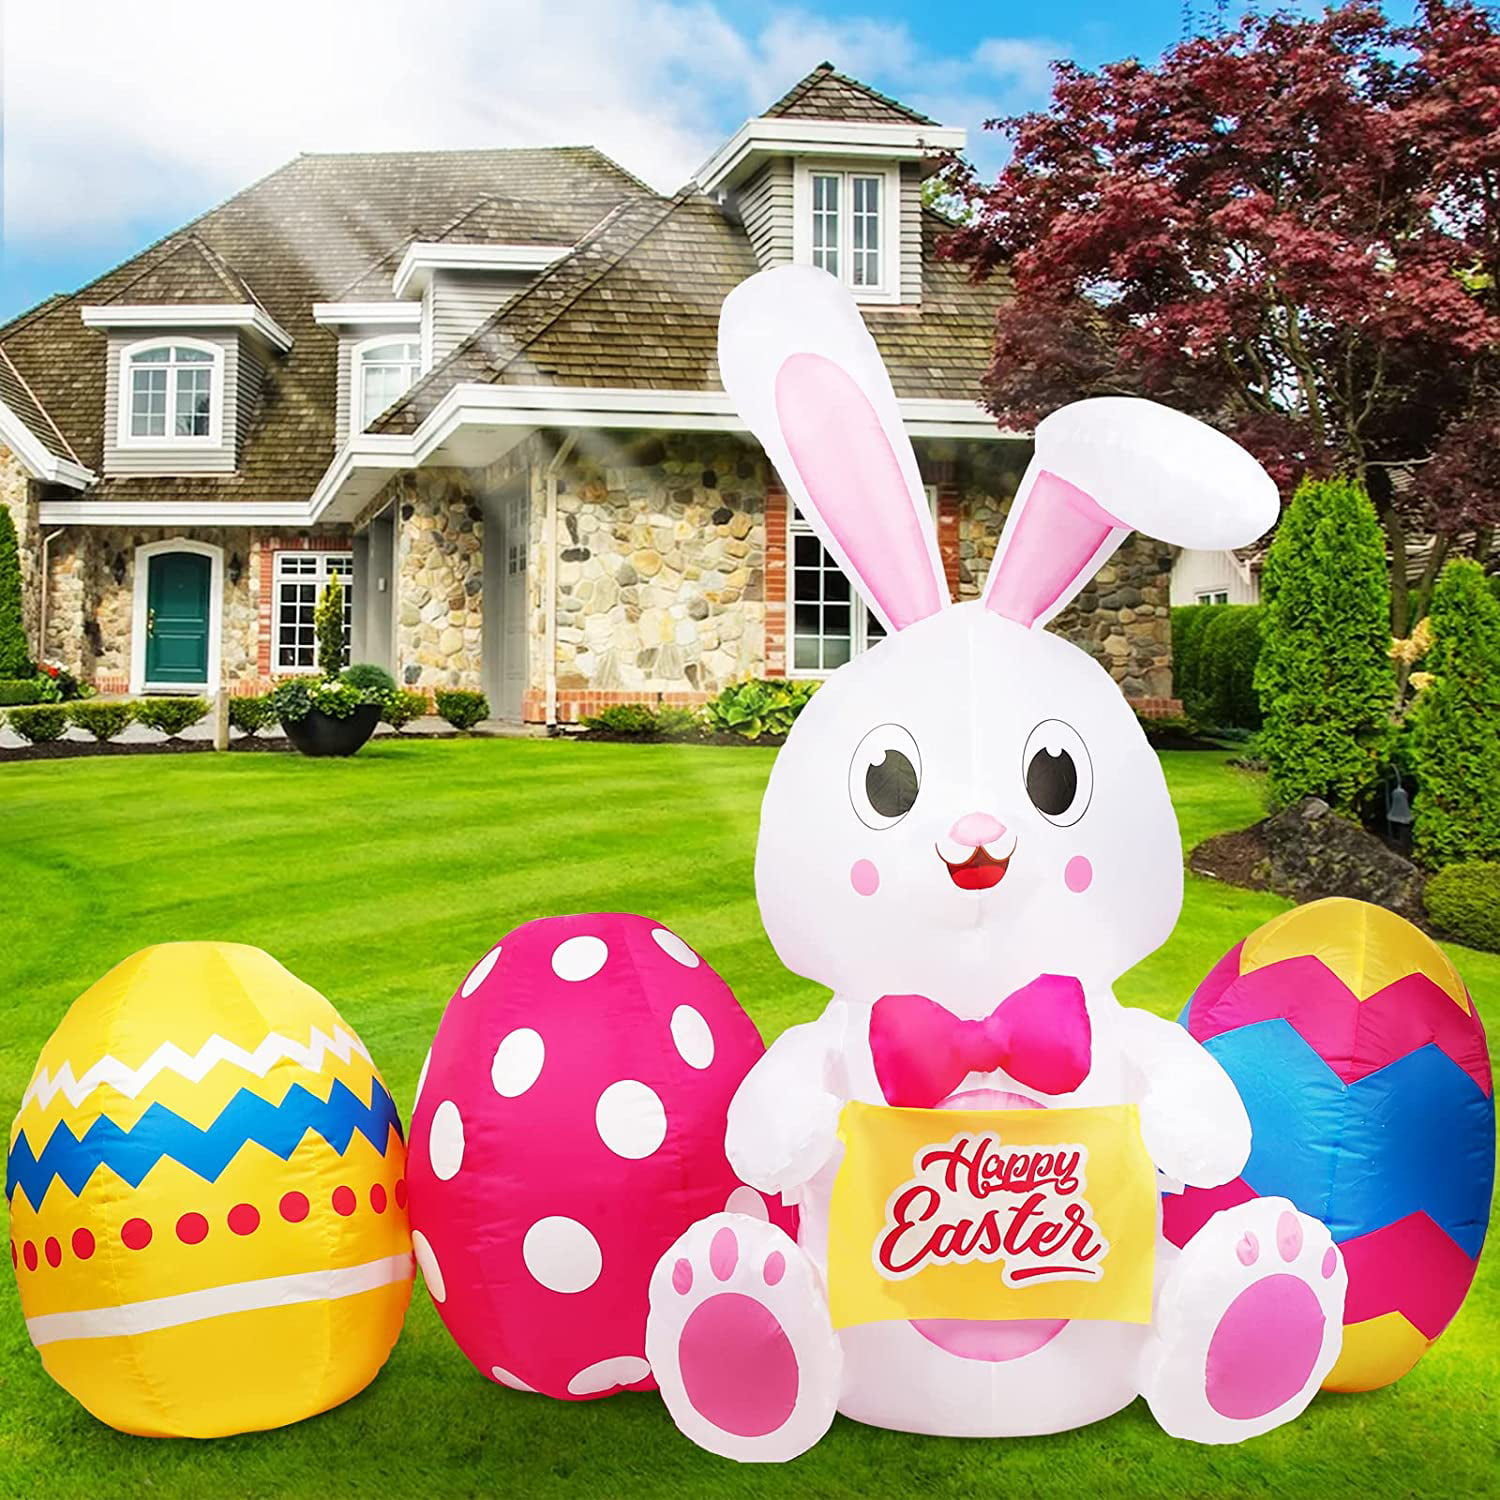 Easter Inflatable Decorations 4FT Tall Easter Bunny with Easter Eggs Blow Up Inflatables Built-in LED Light for Easter Holiday Party Spring Outside Indoor Outdoor Home Yard Garden Lawn Decor 